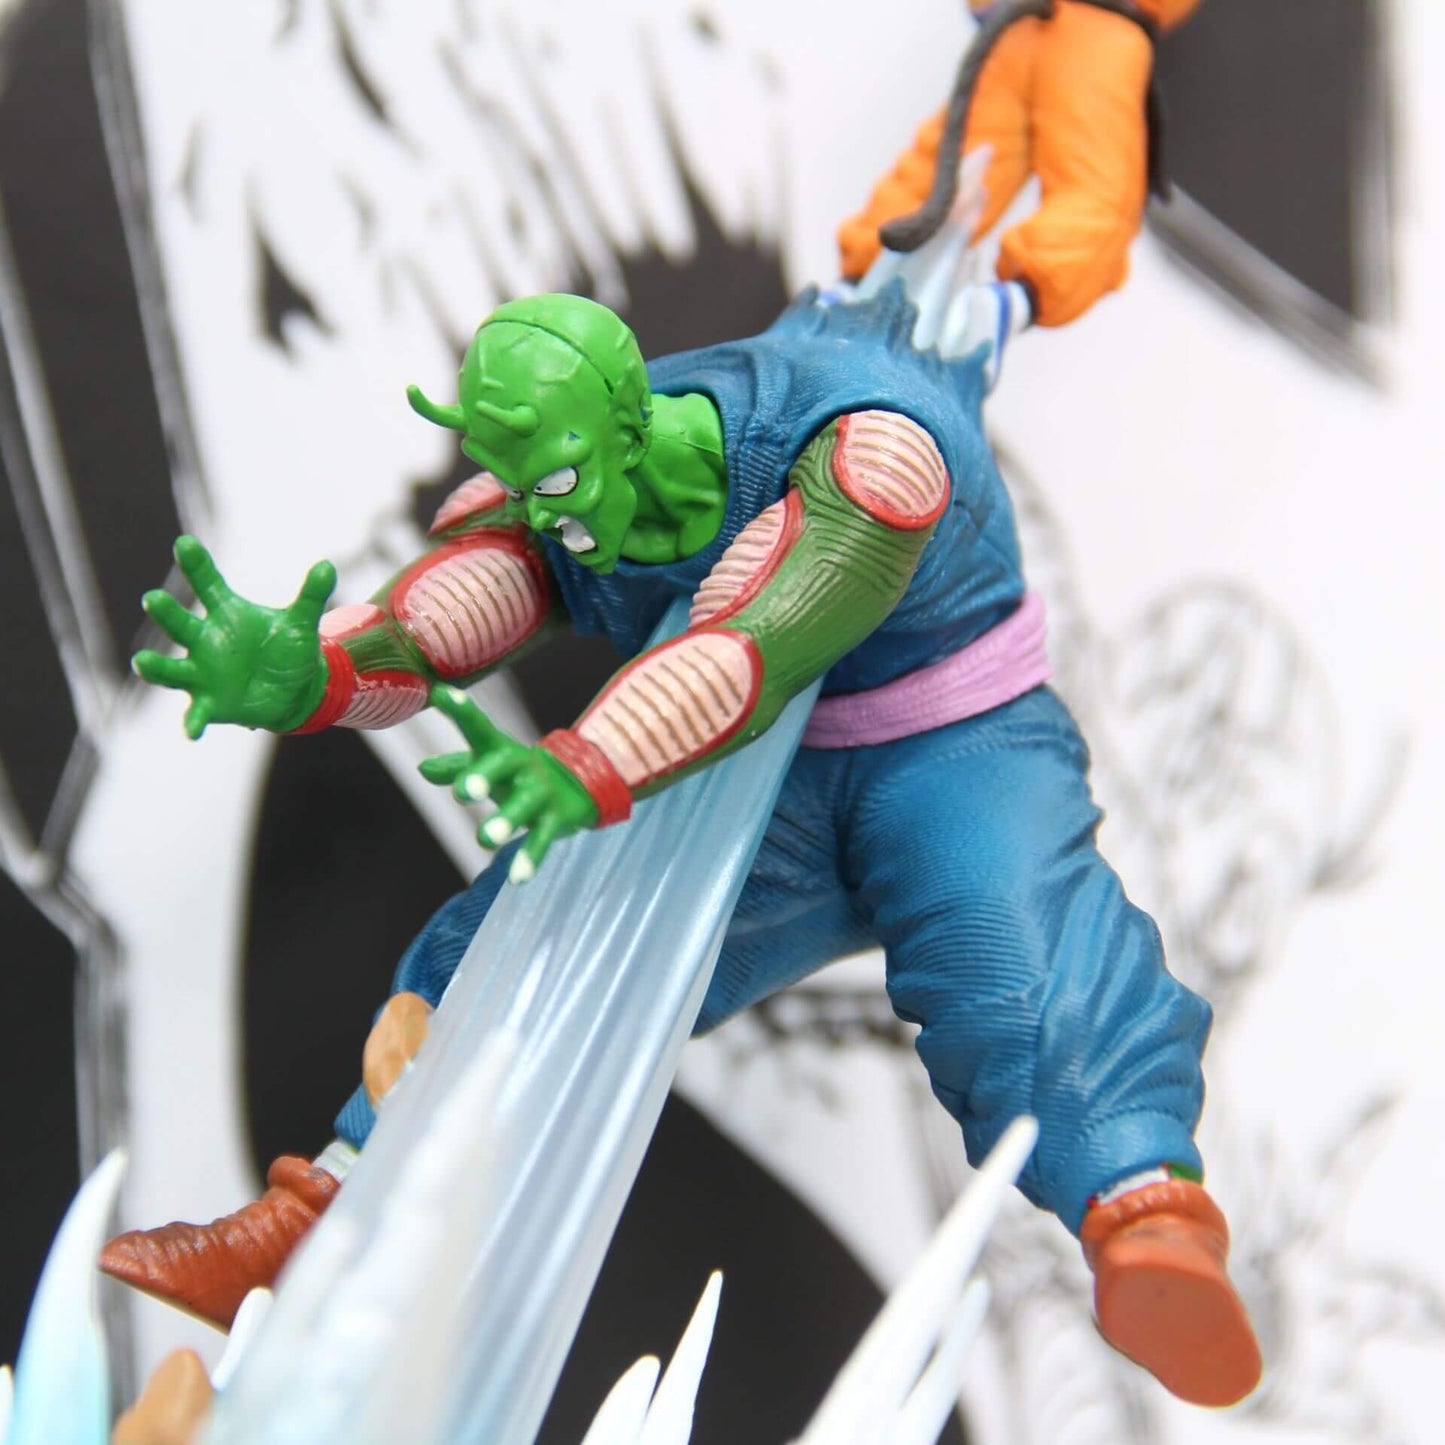 Son Goku Piccolo Fight Scene with LED Light ✪ “Dragon Ball” Action Figure (8 inch)